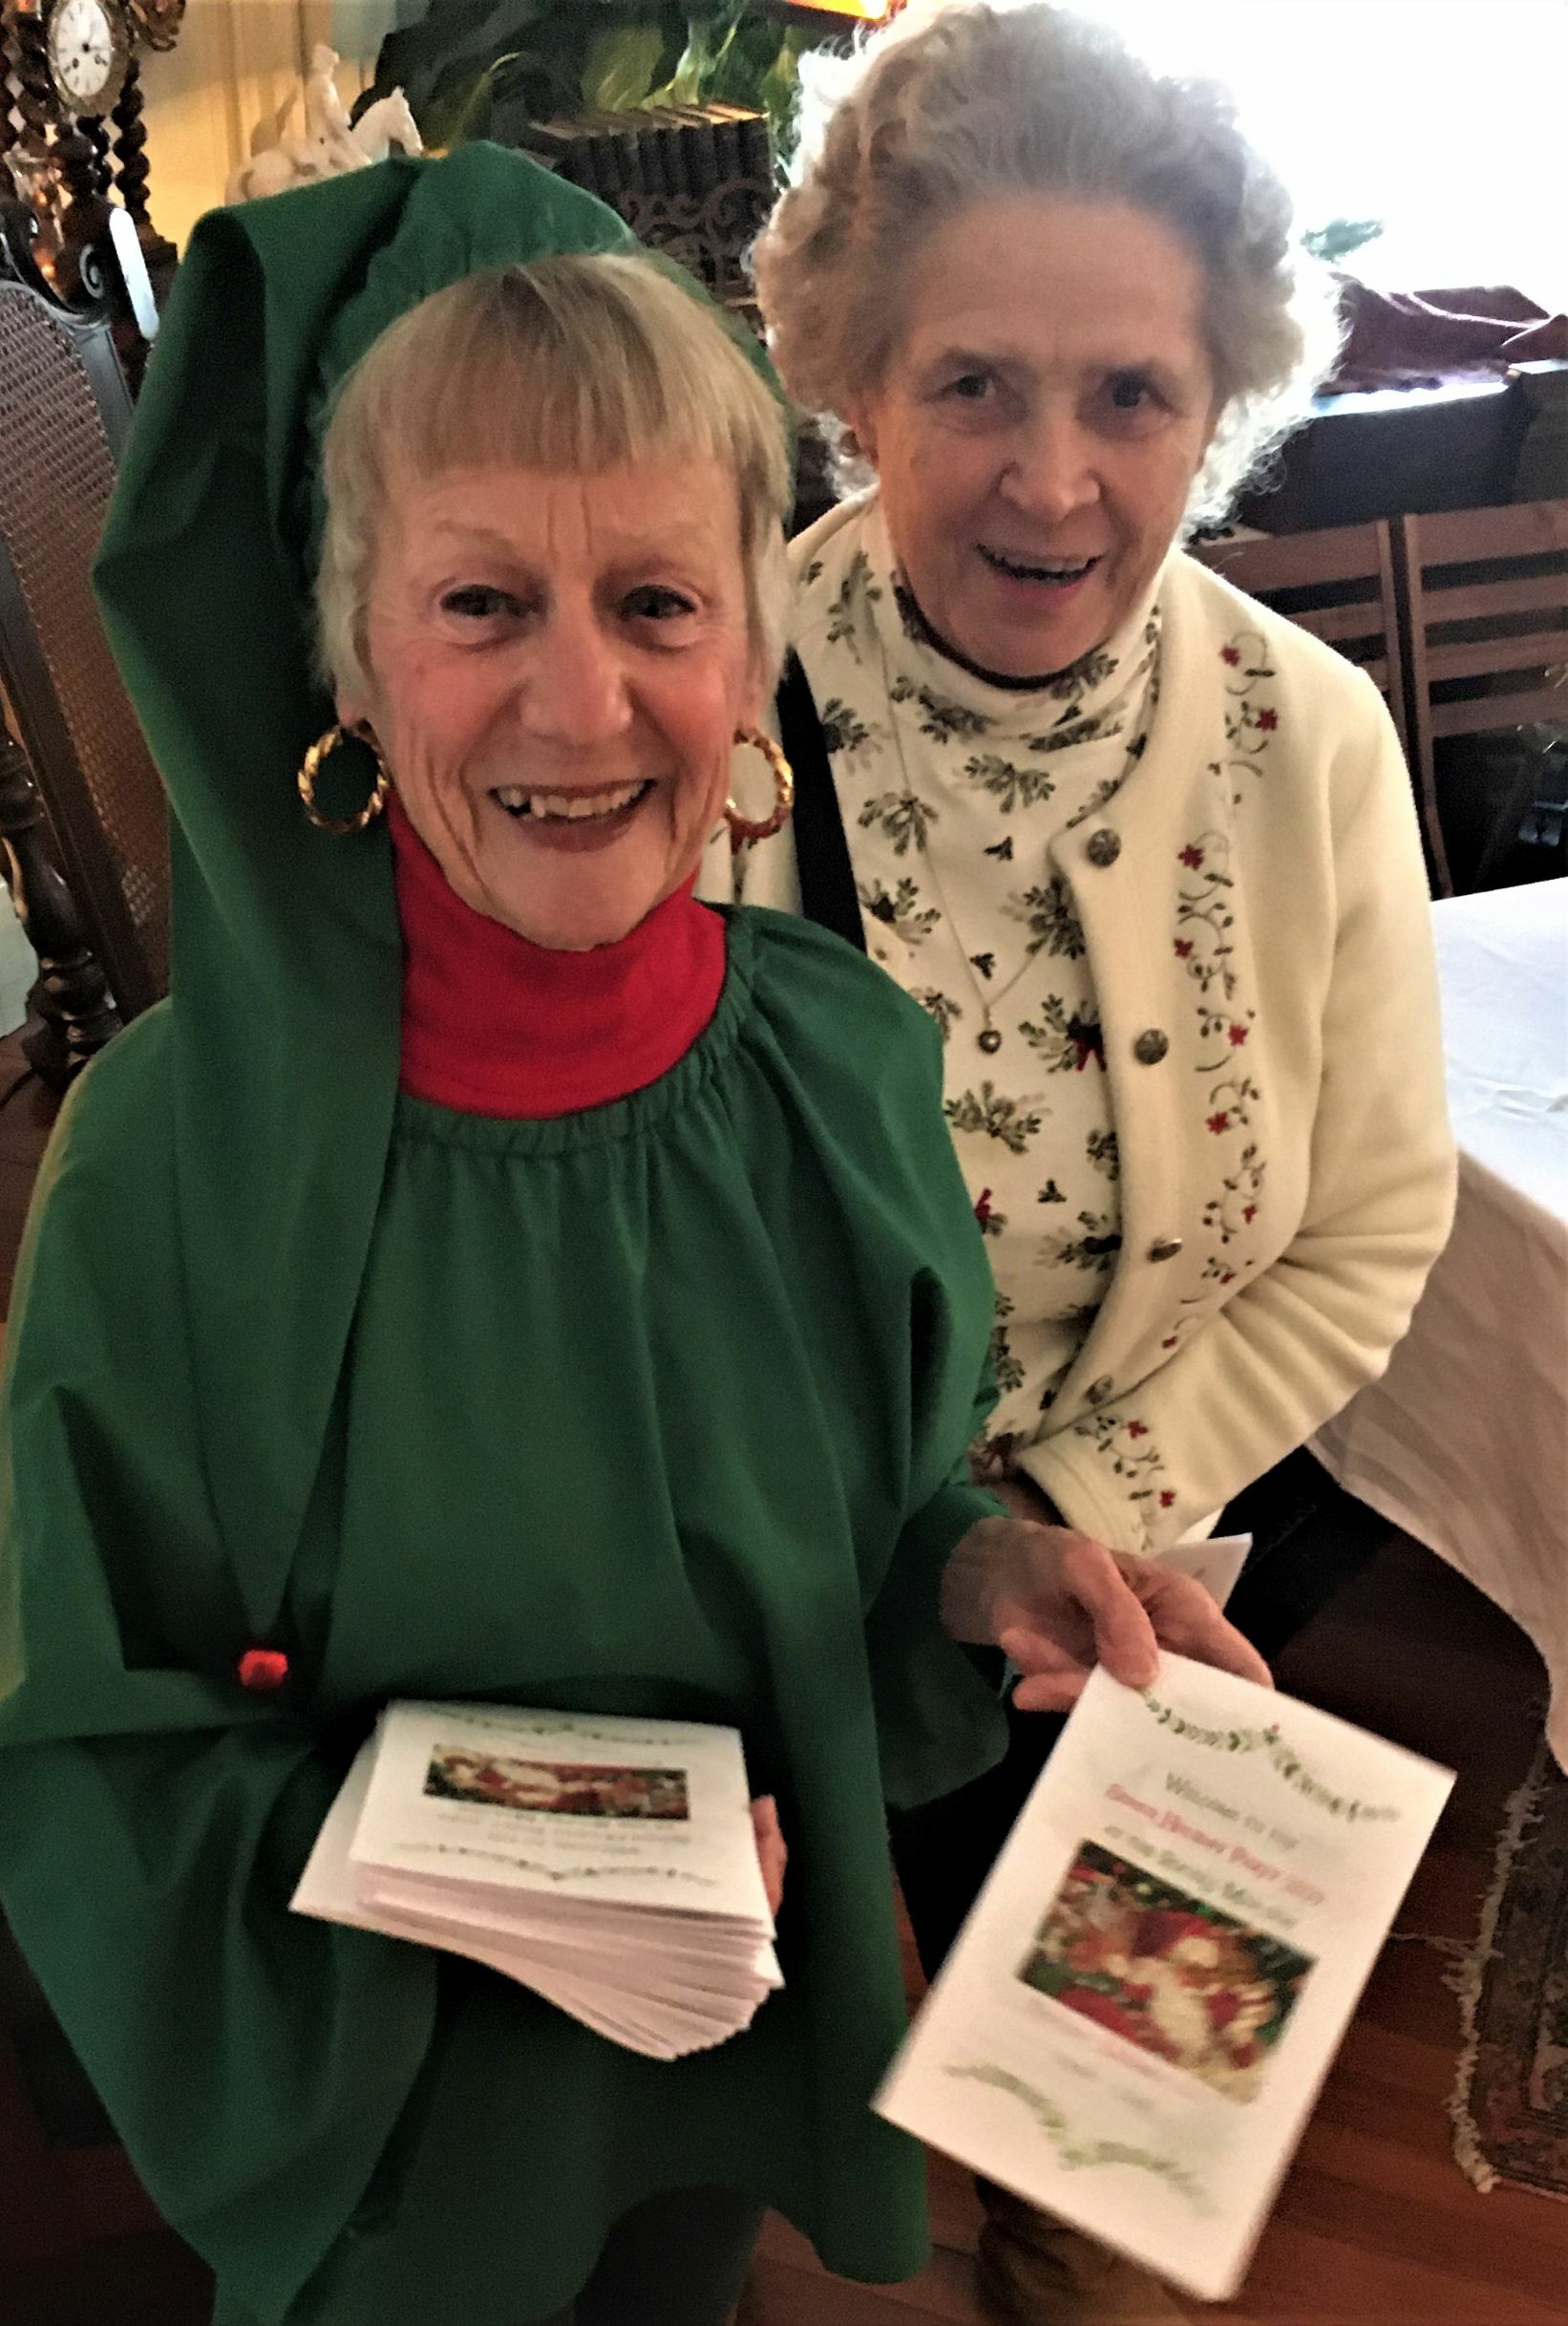 Southampton Village hosted a Senior Holiday Party at the Southampton History Museum's Rogers Mansion on December 12. Barbara Albecht and Betty Arnister were there spreading Christmas cheer. 